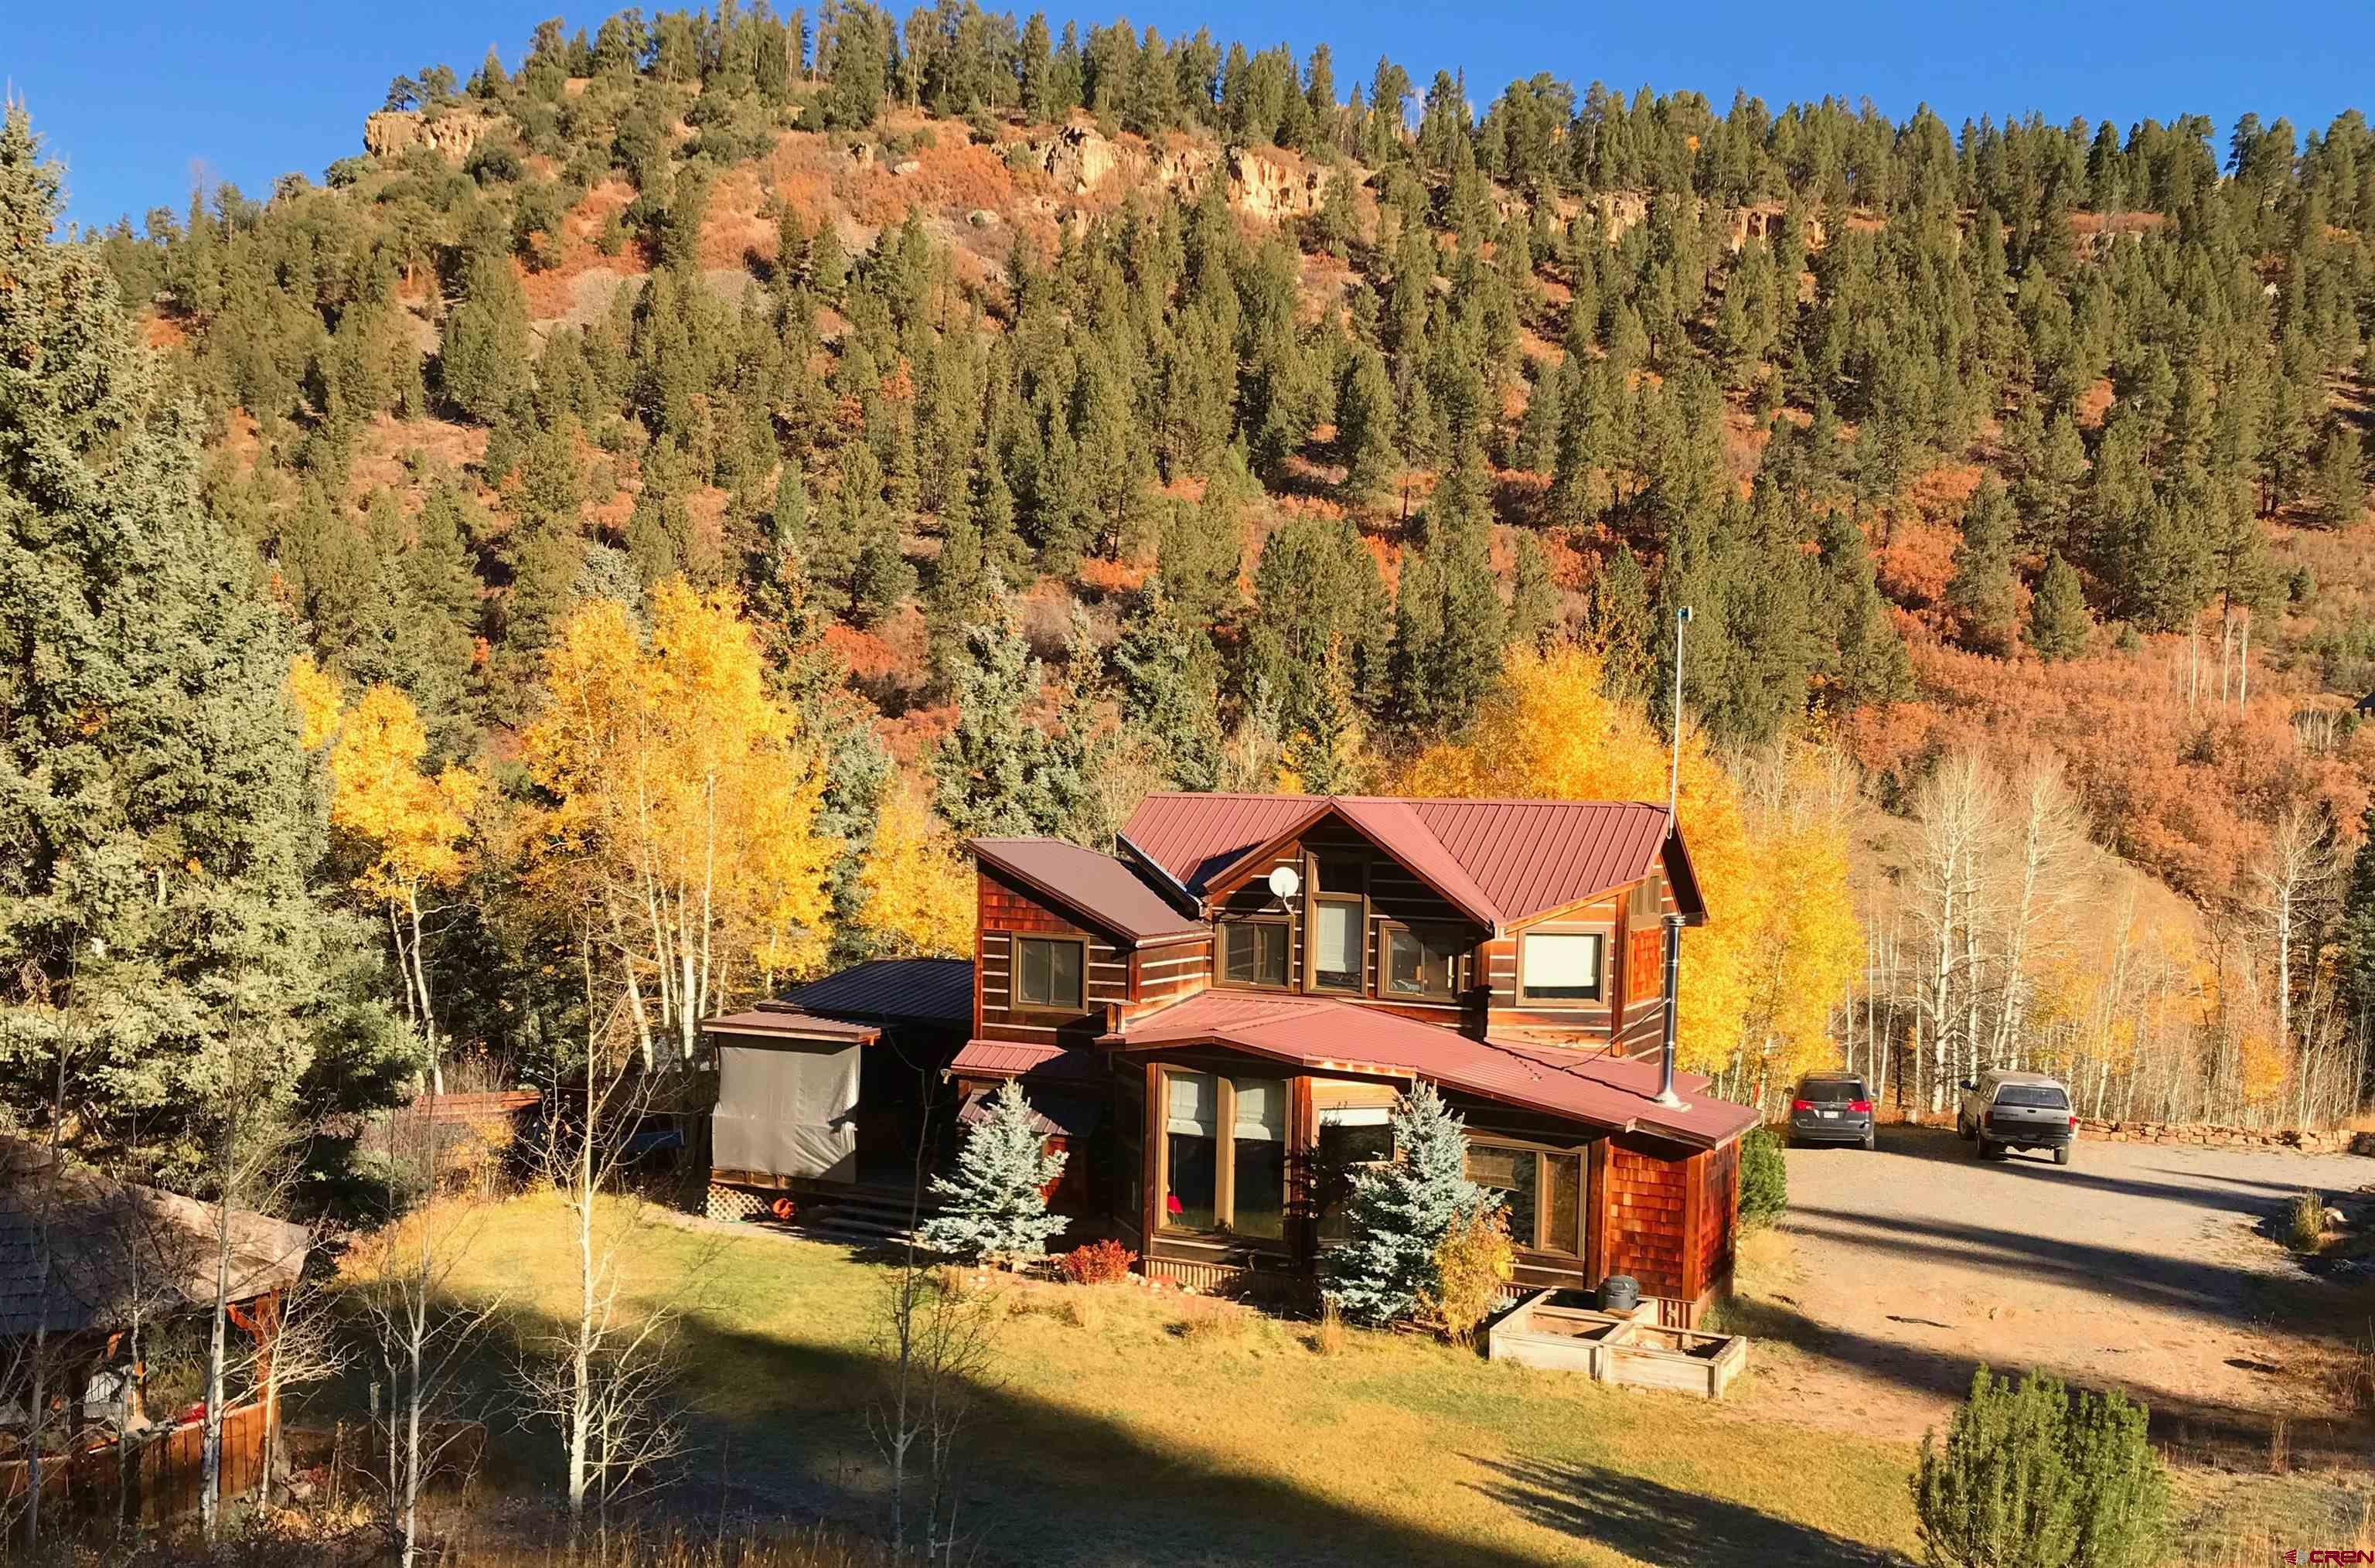 THE CRAFTSMAN'S SPECIAL. ONLY 30 MINUTES TO TELLURIDE. 25+ ACRES OF ULTIMATE SERENITY. NO TRANSFER TAX. YES SHORT TERM RENTALS OK (with proper license) . This is the perfect home for someone who wants to get away from it all. With three bedrooms and two and a half baths, this expertly crafted home has plenty of space for a family or guests. Custom tile and wood work throughout give it a warm and cozy feeling, while the light and bright open living area is perfect for entertaining. The wood stove is perfect for a cold winter night, and the property is only 30 minutes from Telluride & Ridgway and all those towns have to offer, but feels like miles away from the bustle. There is no transfer tax, and the 25.59 acres of solitude and space include several accessory buildings like a shop, sheds, gazebo, AND a fully equipped, 700 square foot, 2 bedroom, 1 bath, full kitchen & washer/dryer 'tree house' accessory building*! This is a true craftsman's special close to biking, skiing, dining, music & theatre, but all the elbow room and peace and quiet you need! Relax and watch the wild turkey, herds of elk and even a bobcat or two walk by your picture windows while you sip your tea by the fire.  STR Info:  Seller has been making approximately $20k/annually very casually AirBnB-ing his home.  AirDNA estimates a potential income of up to $80k/annually.